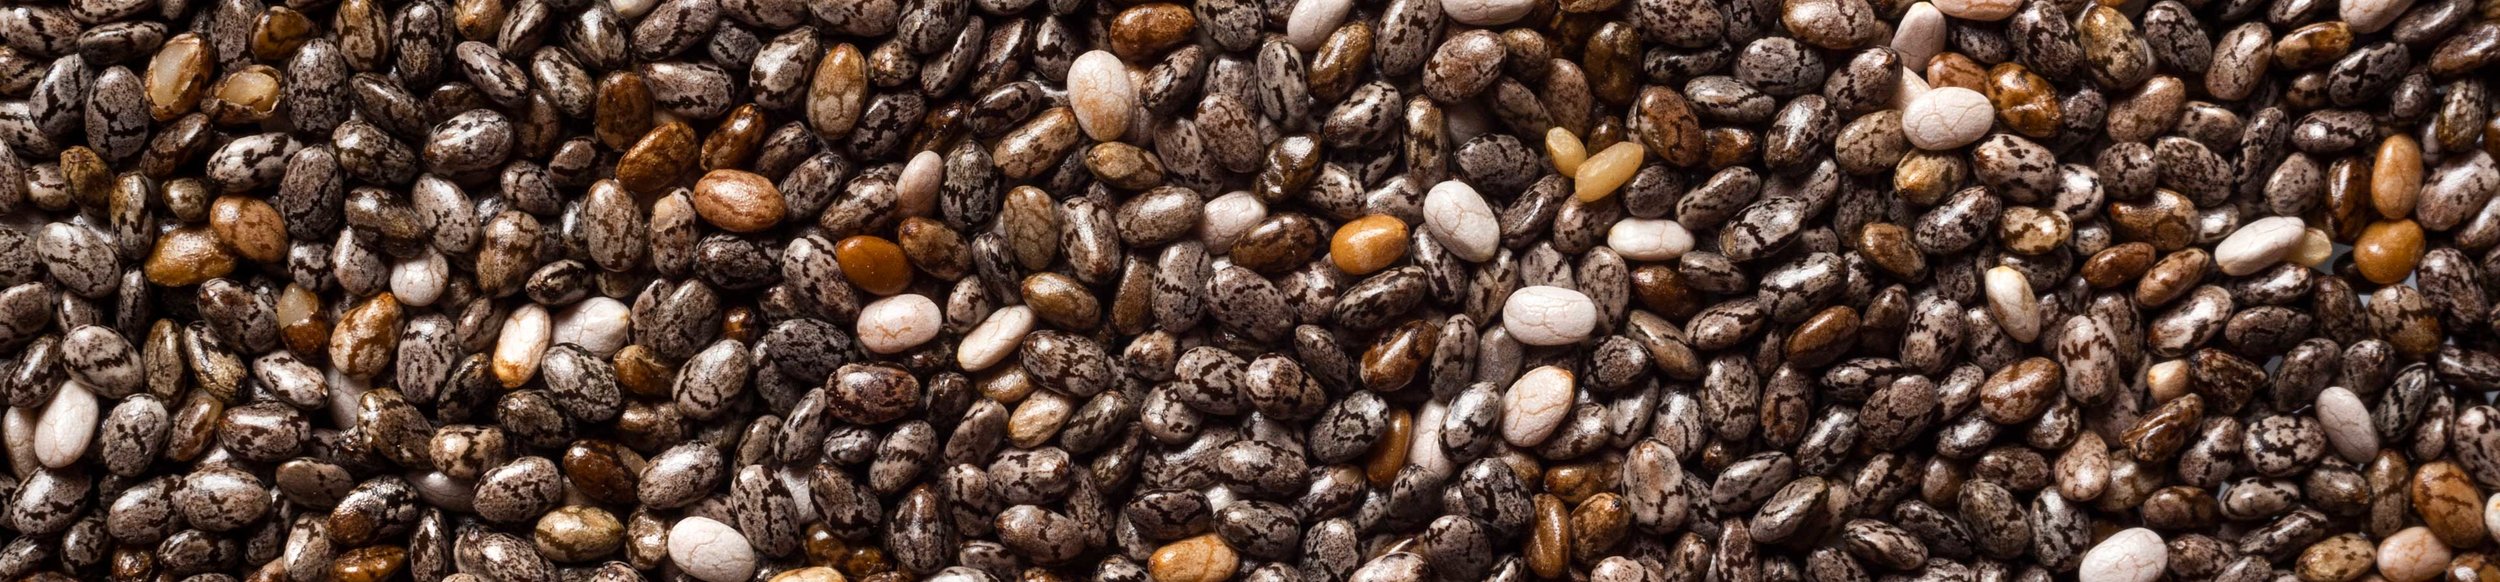 Chia seeds are small, oval shaped and while they may range in colour from black, grey, or black spotted to grey, their nutritional values are very similar.